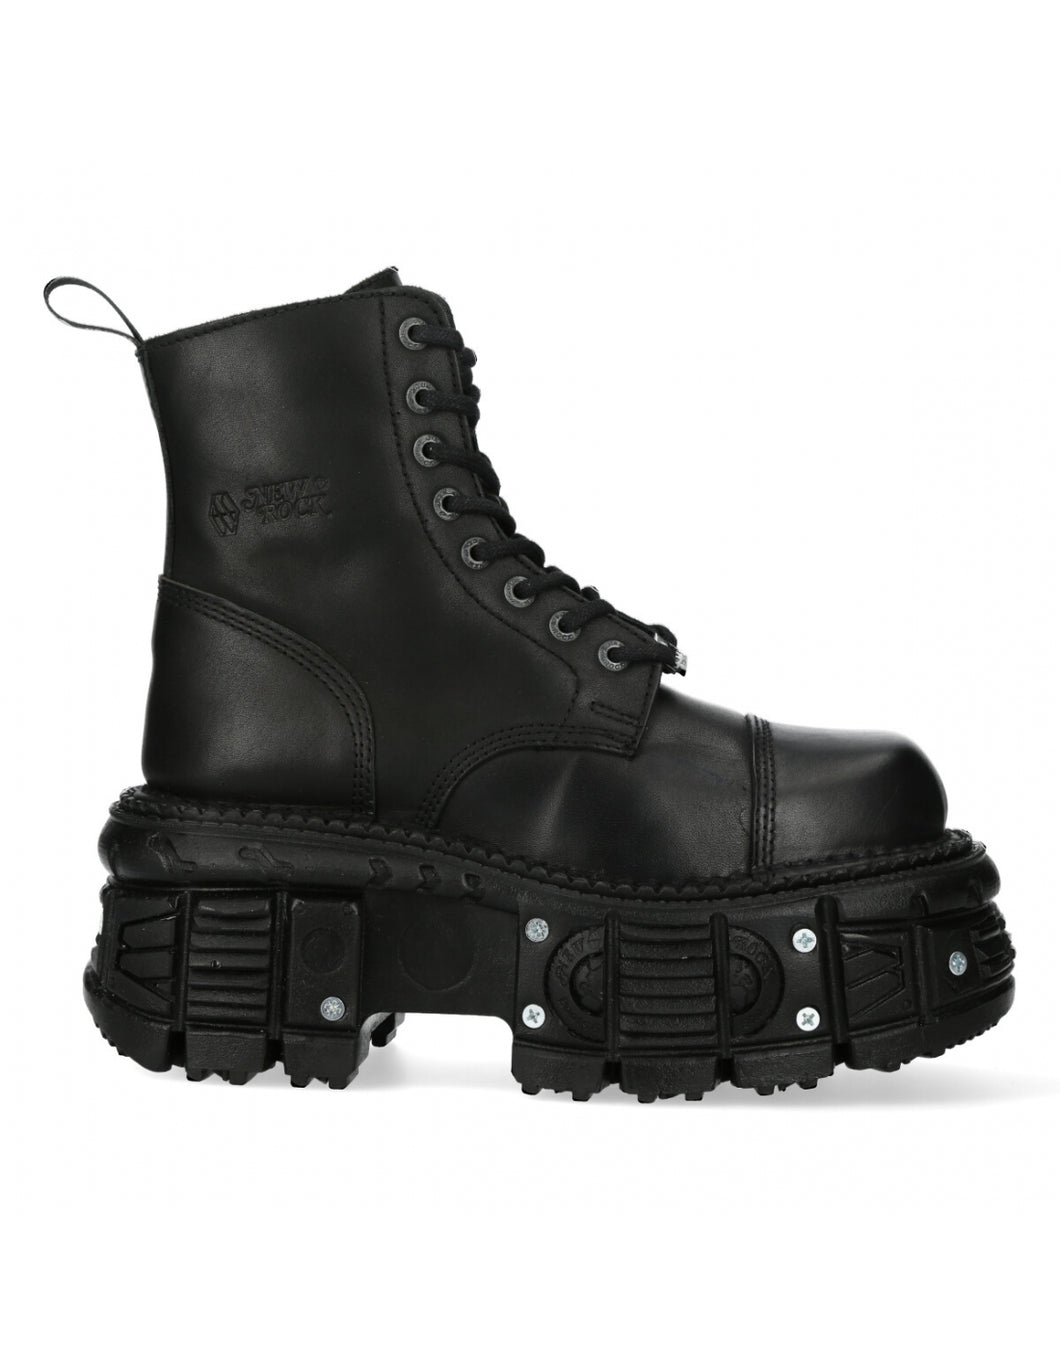 New Rock Shoes Boots Boots TANK083-C1 Gothic Tank Collection Black Genuine Leather